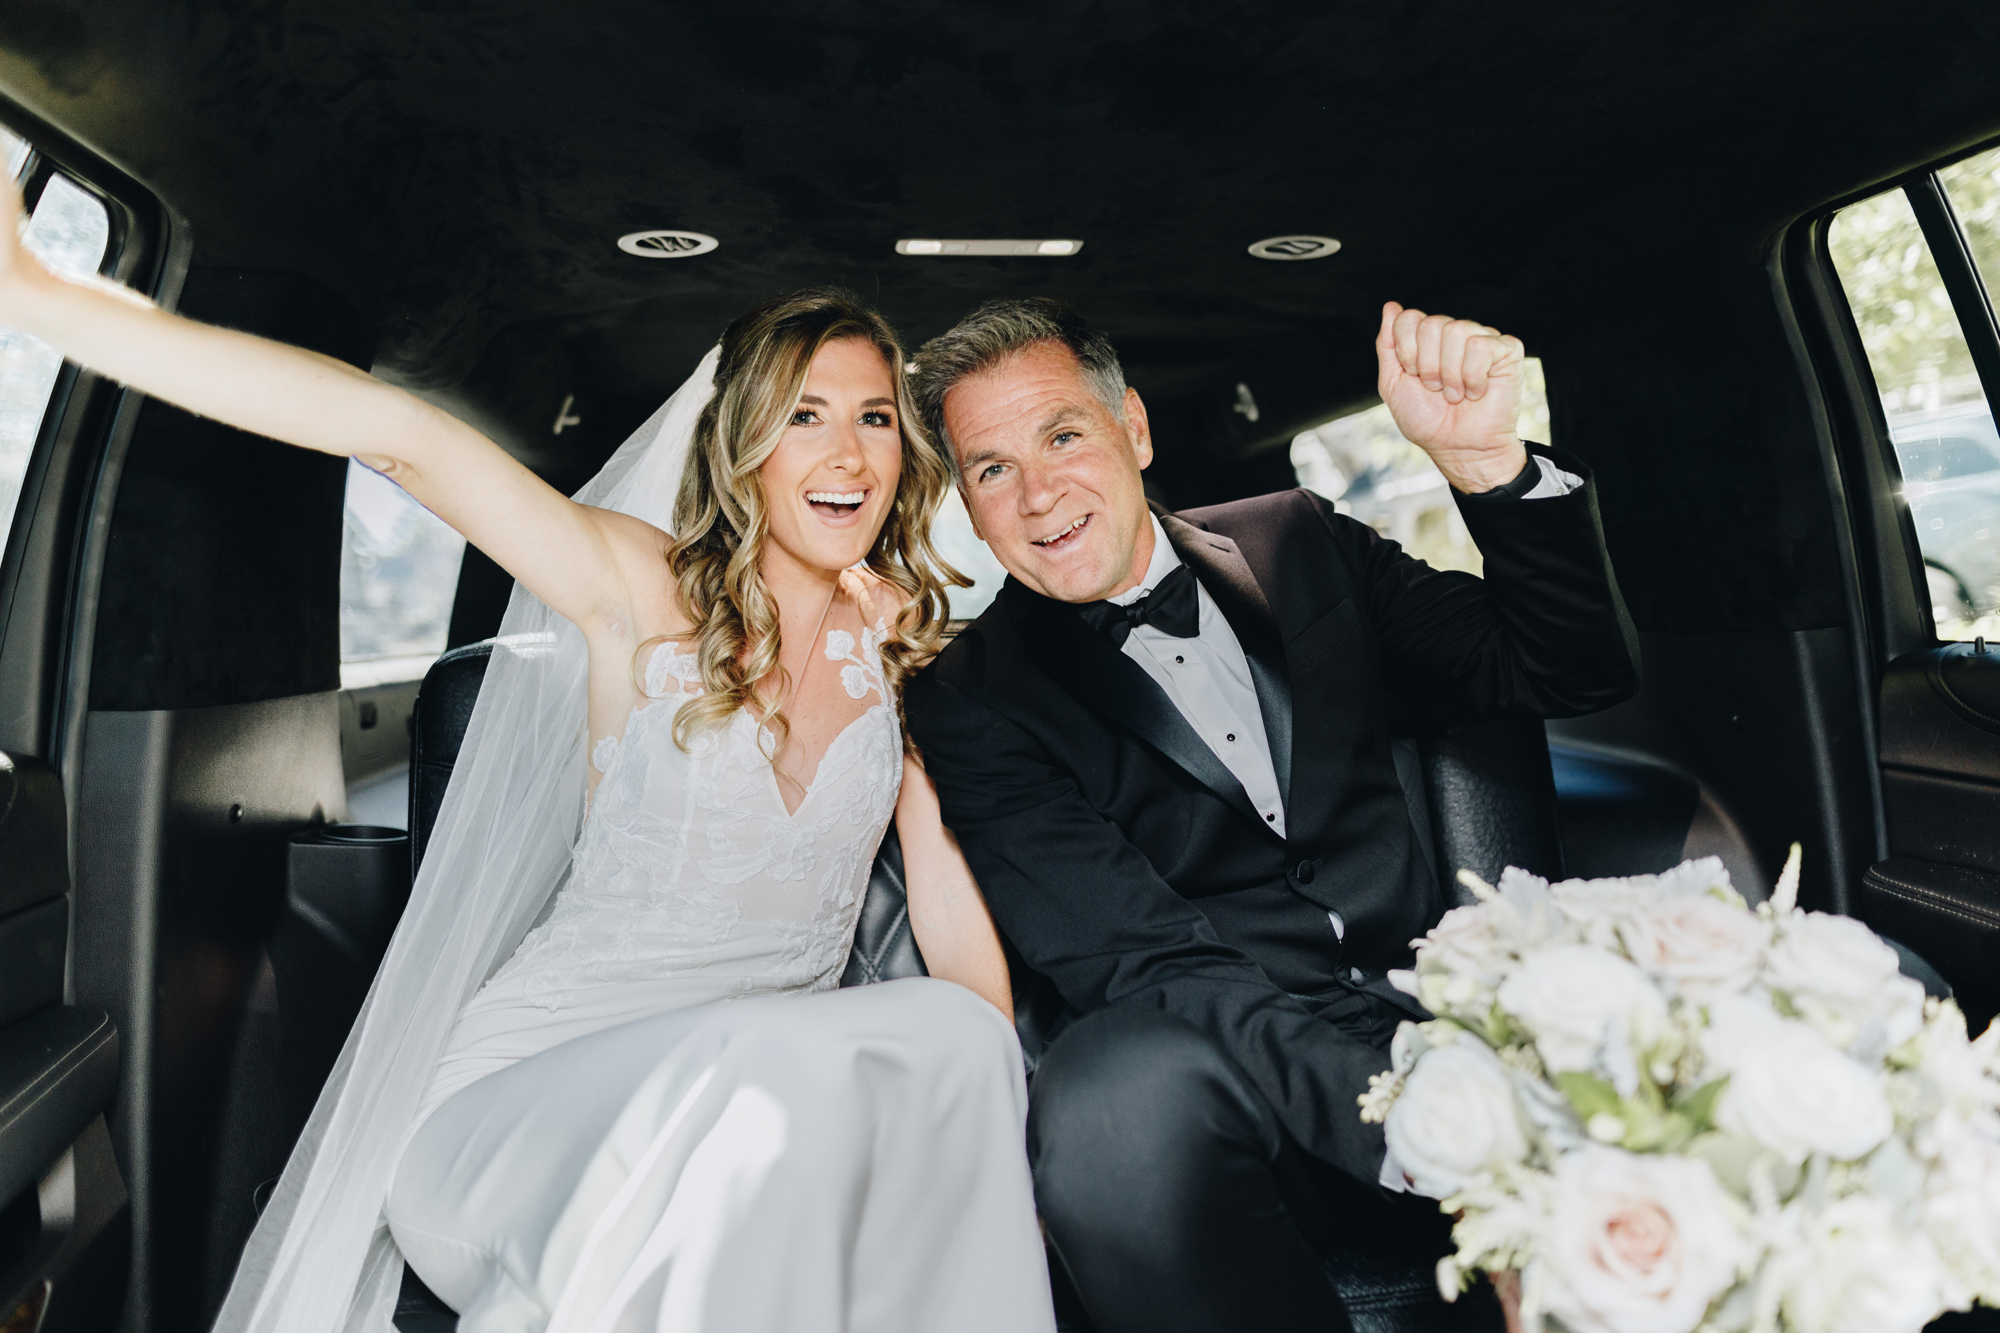 Bridal limo ride in Long Island